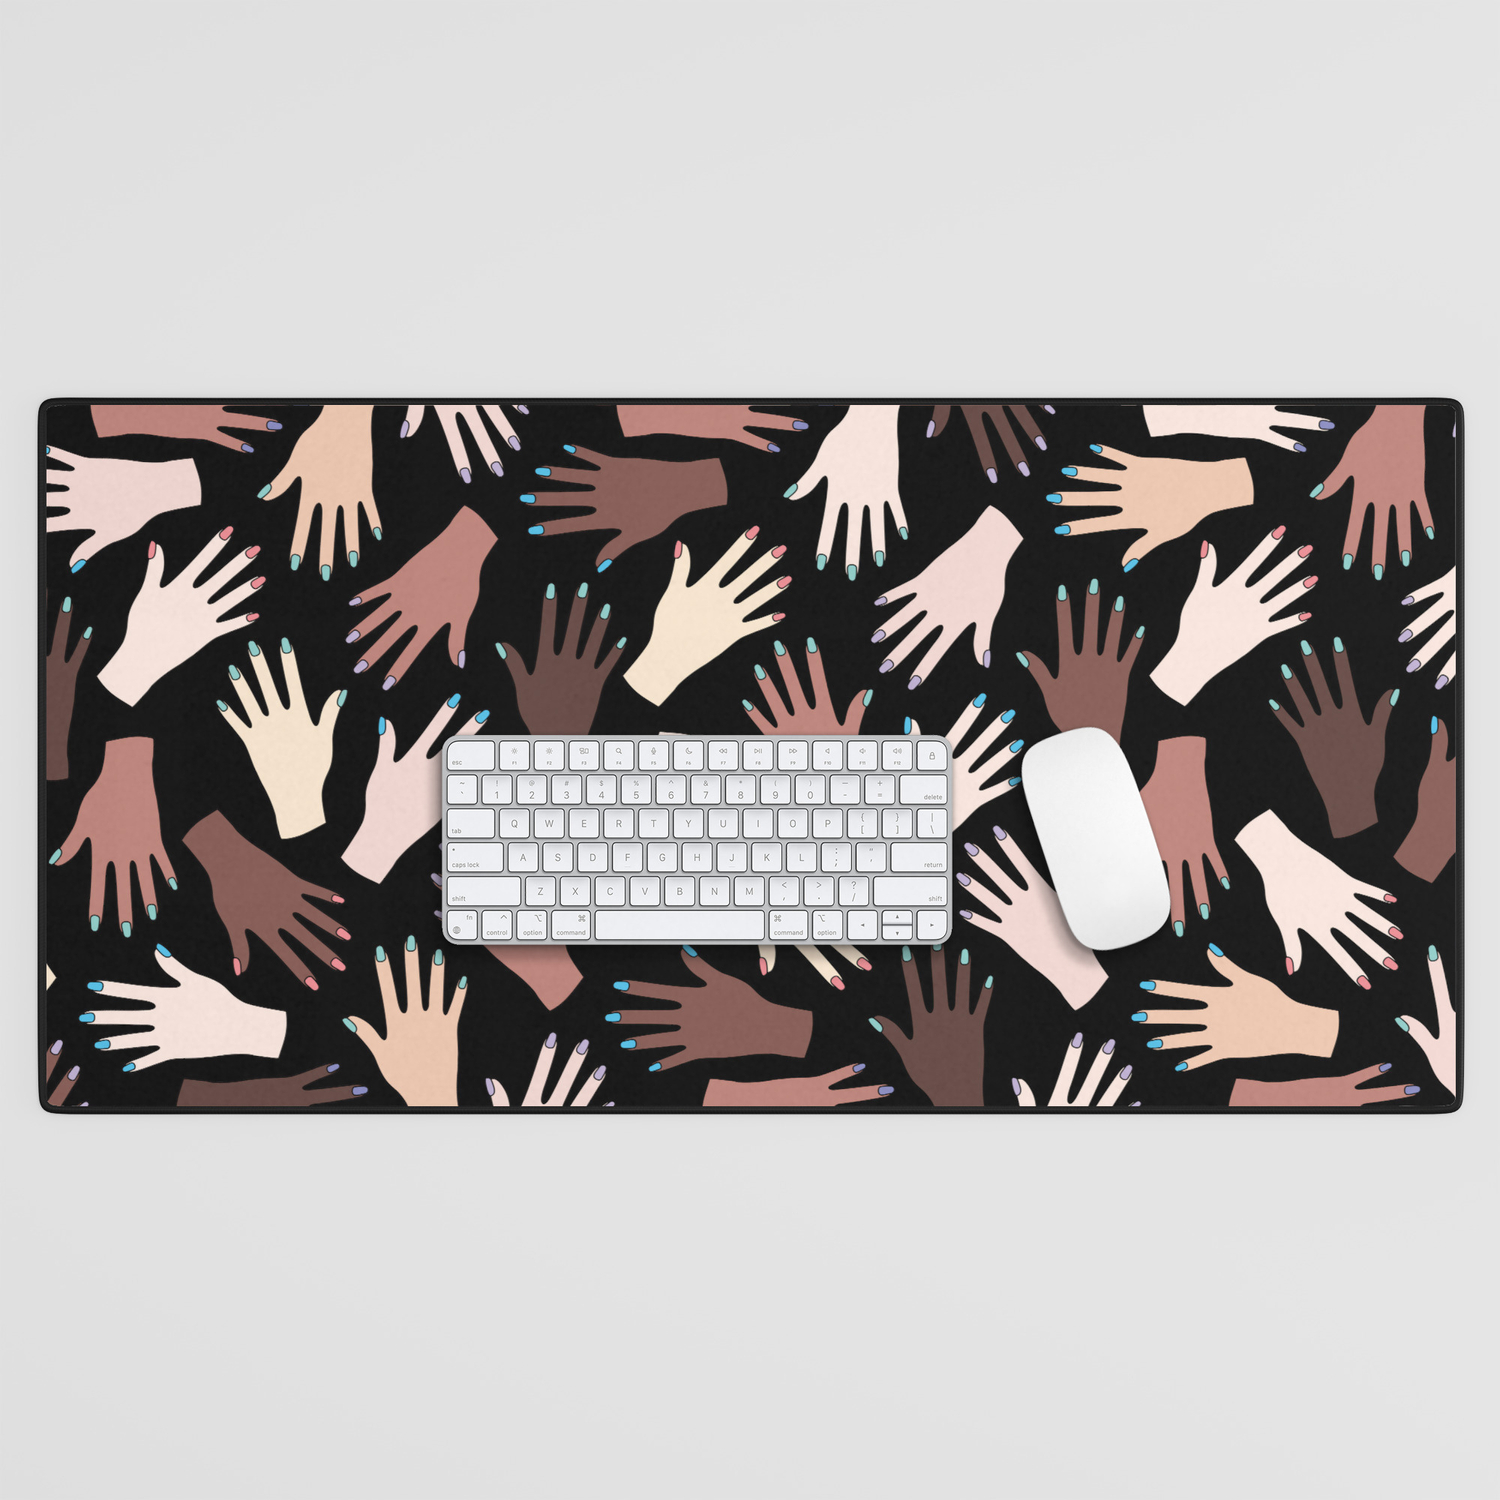 Nail Expert Studio - Colorful Manicured Hands Pattern on Black Background  Desk Mat by XOOXOO | Society6